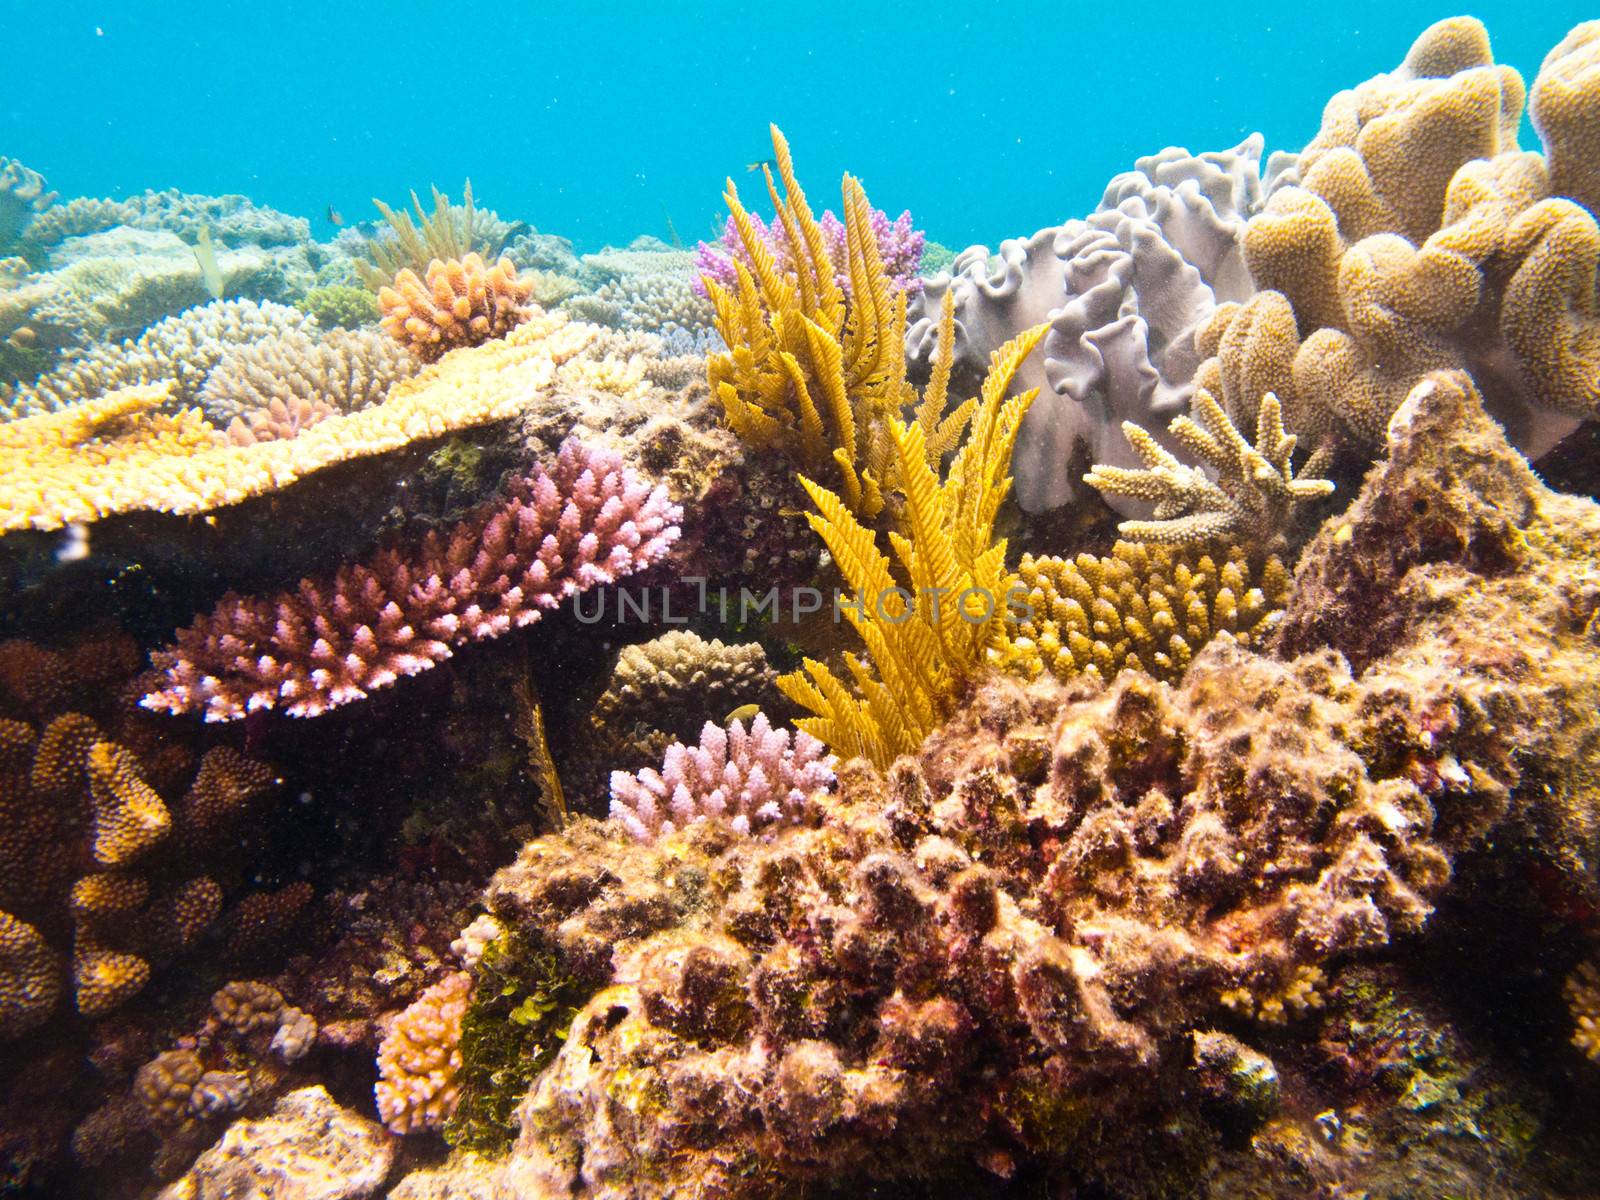 View underwater shot of the fantastic plant life of the coral reef.